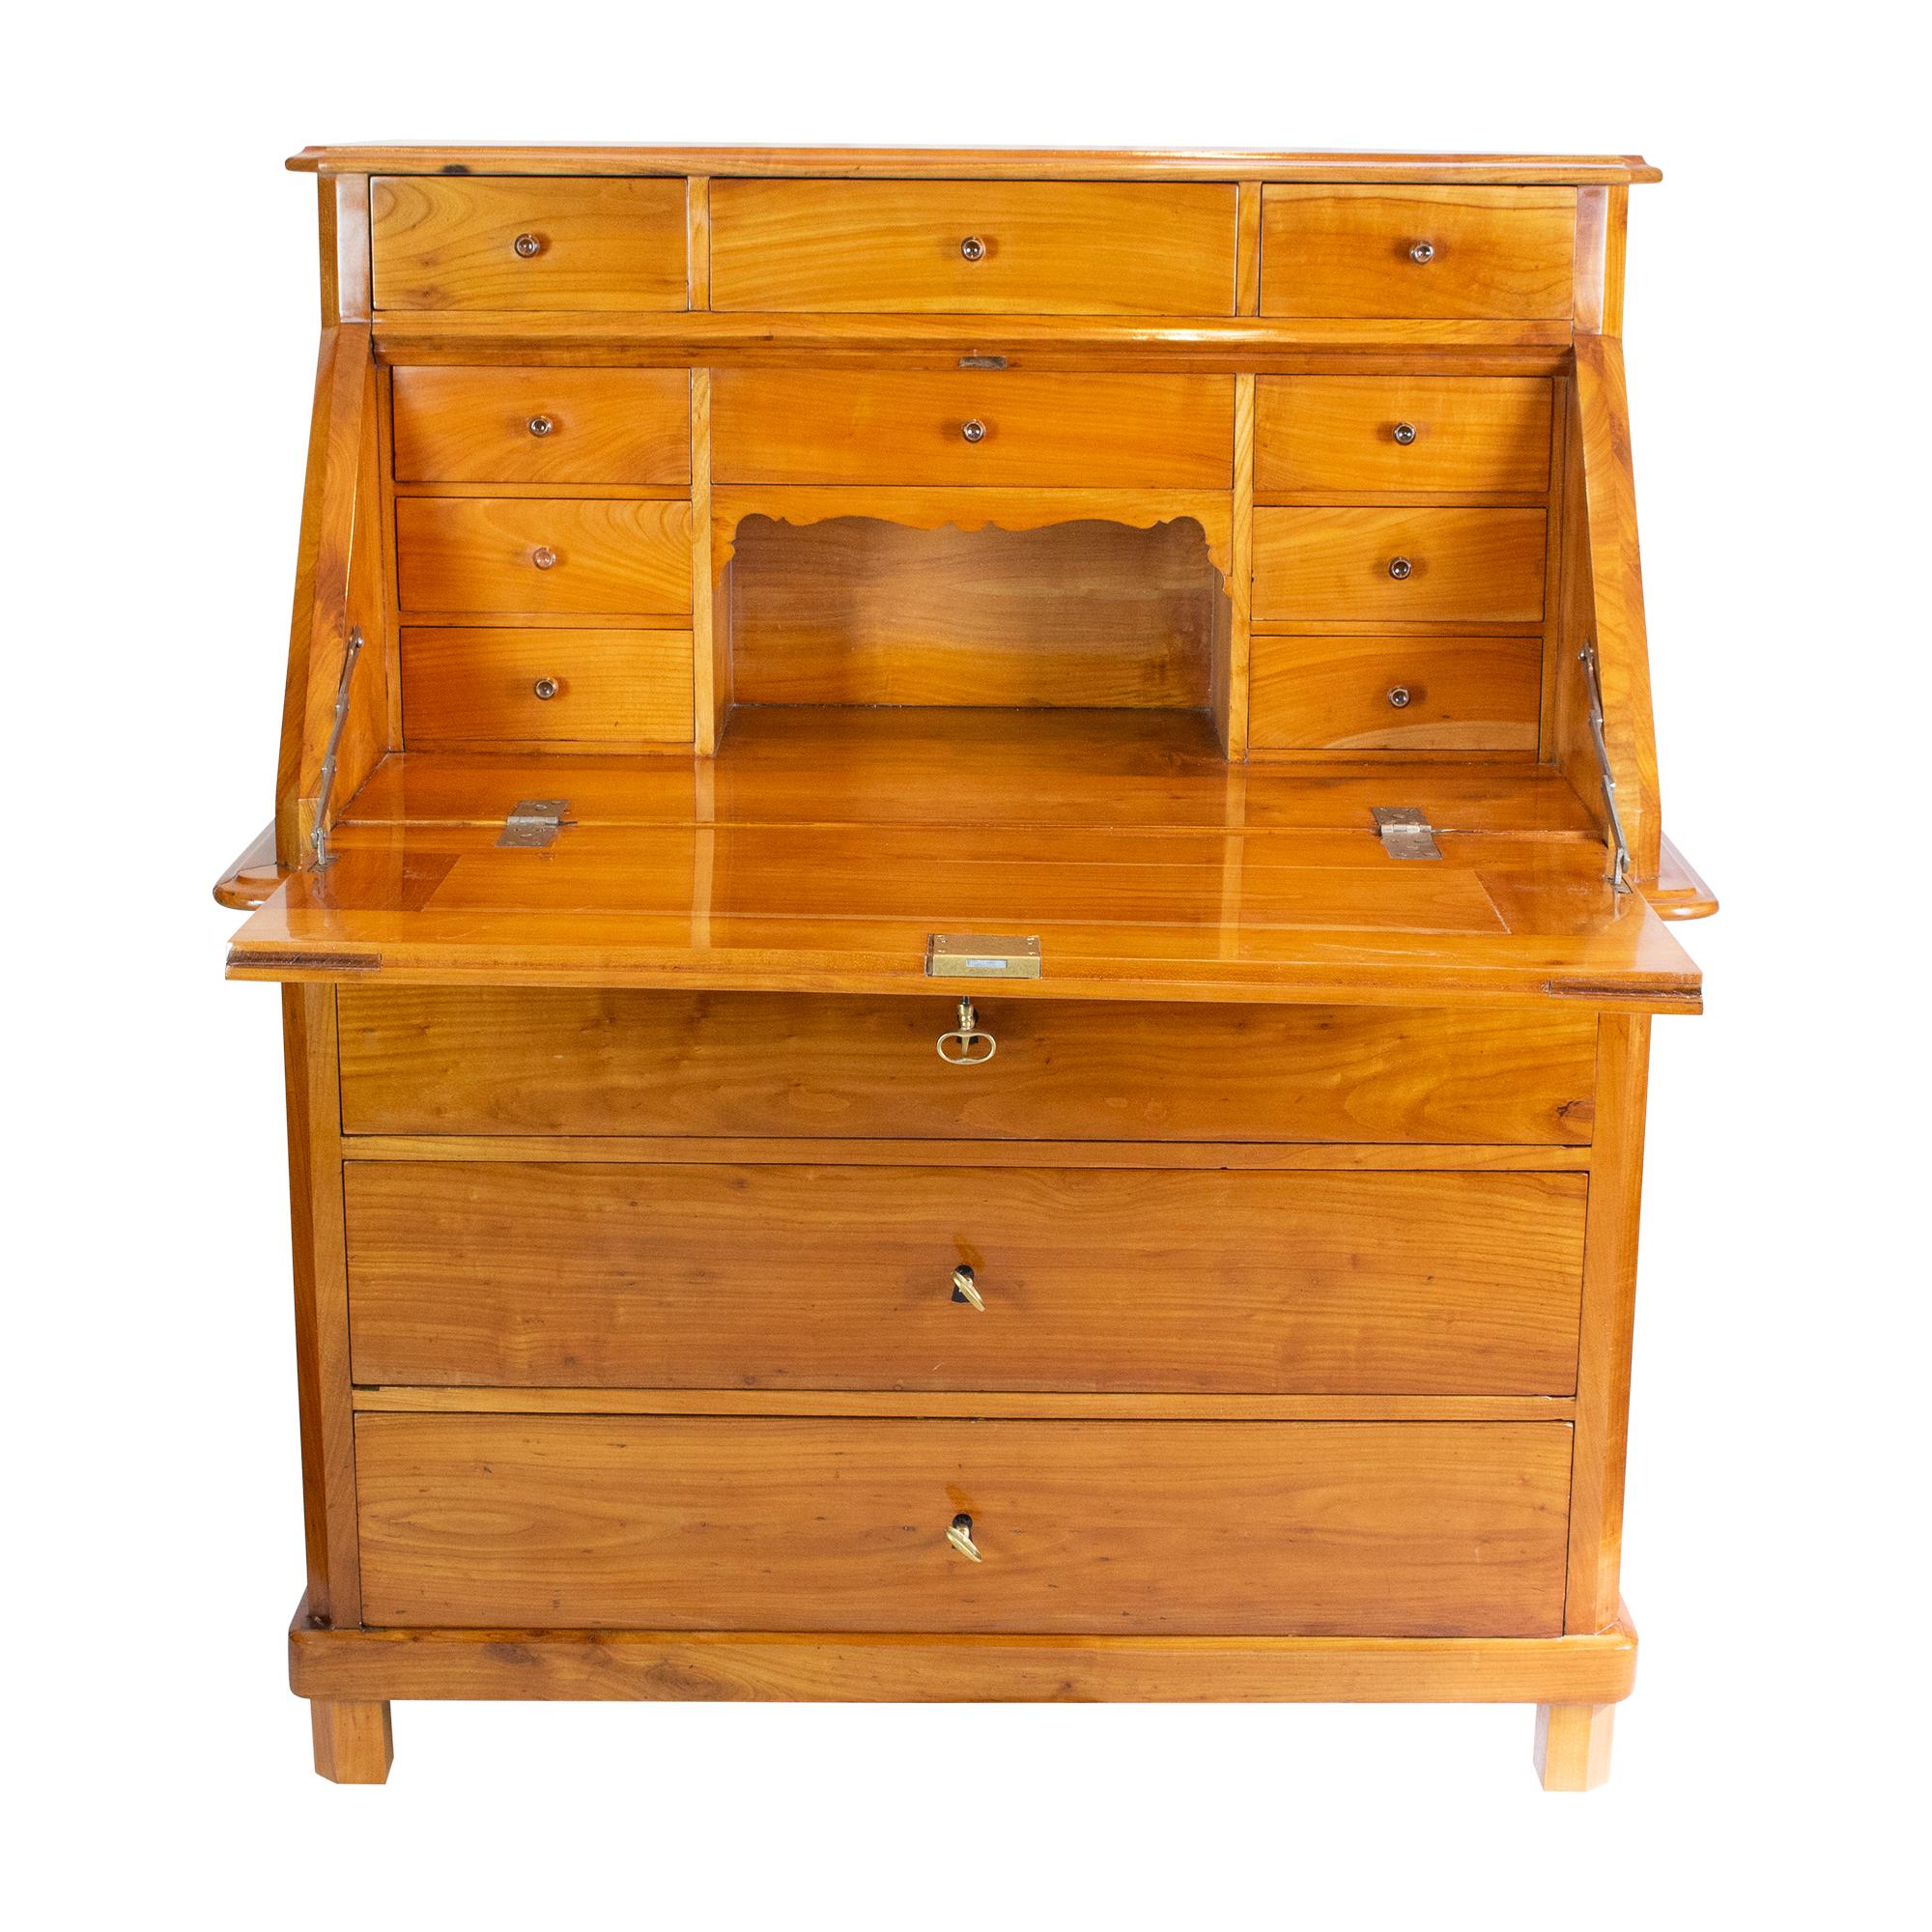 Introducing a stunning late Biedermeier Slant-Front Secretary, crafted from solid cherry wood in the 1840s. This exquisite piece of furniture features three drawers spanning the entire width of the base, providing ample storage space. The